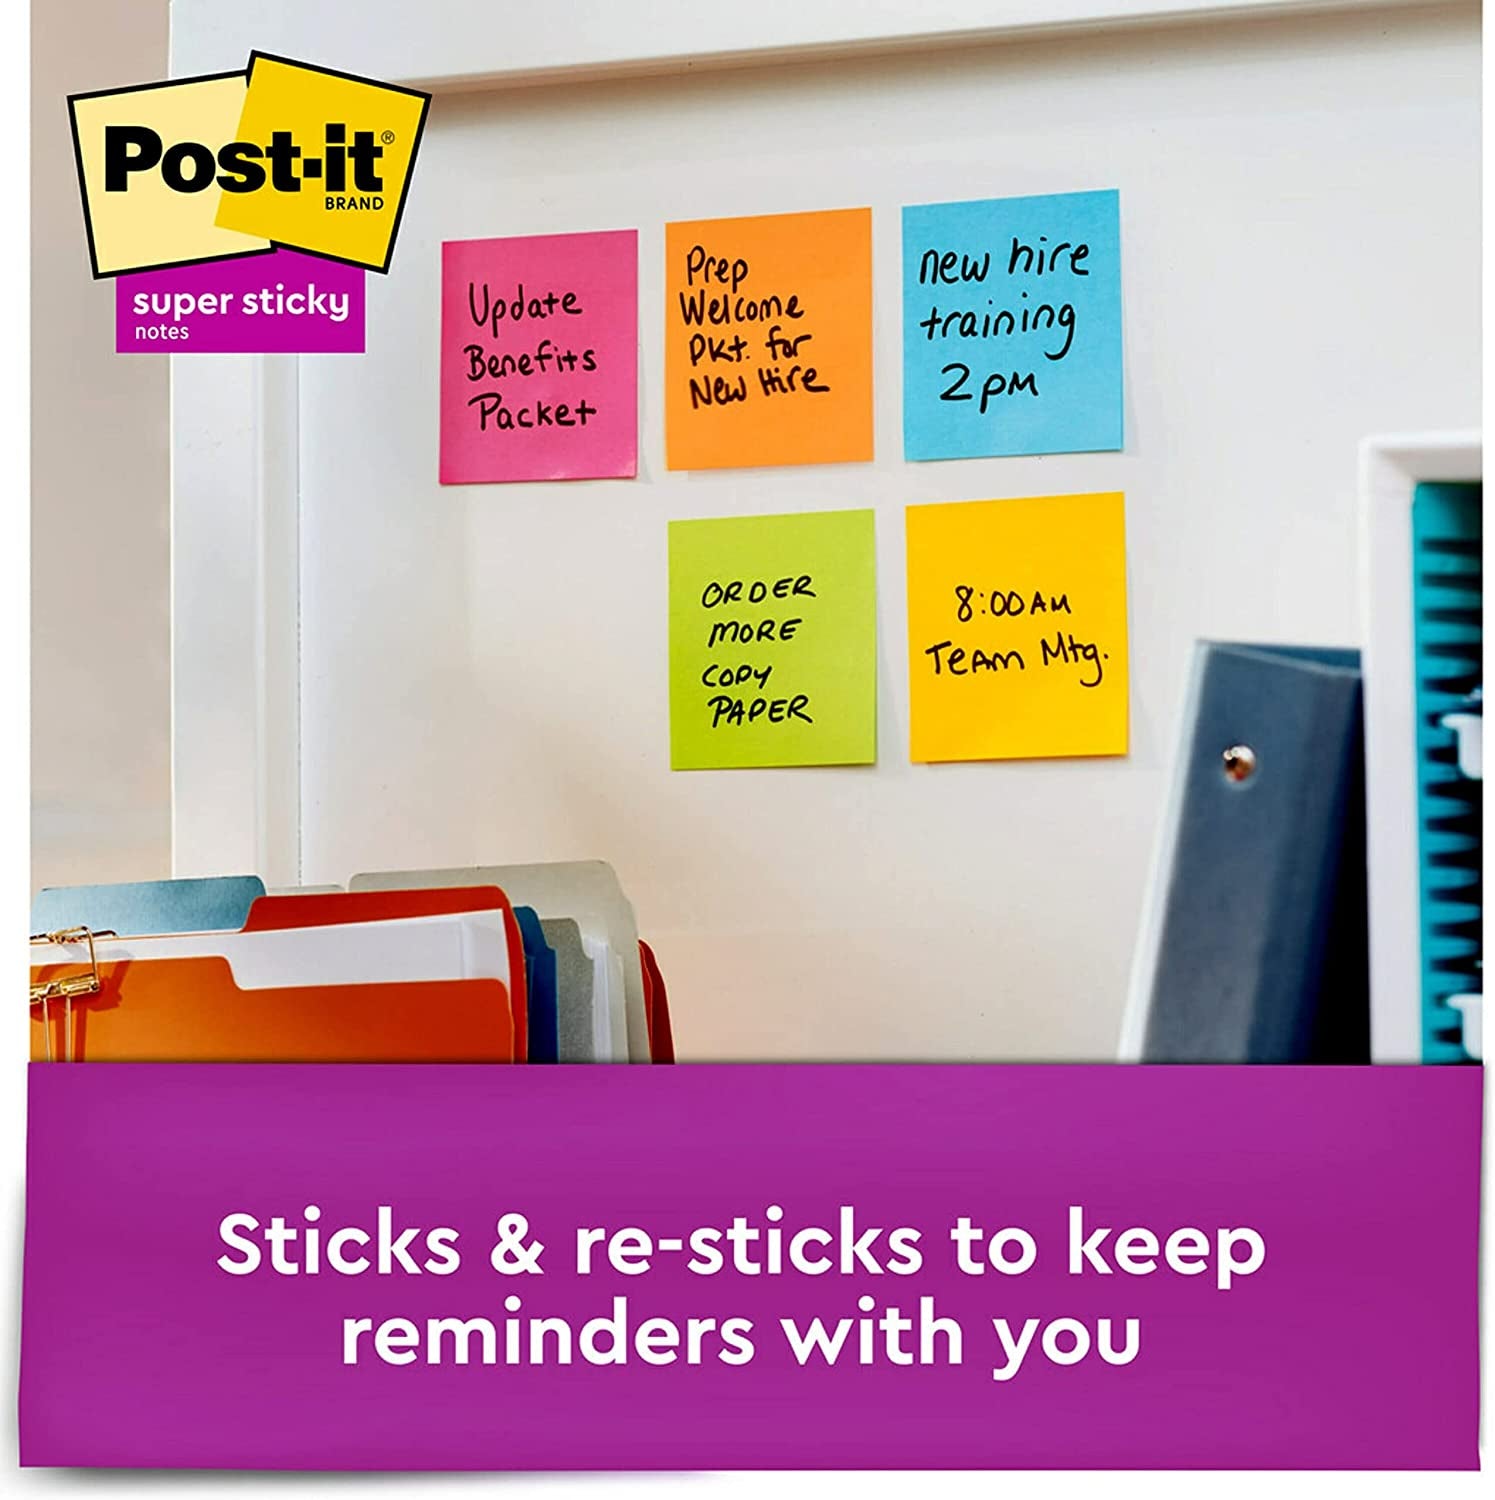 Post-It Super Sticky Notes, 3X3 In, 3 Pads, 2X the Sticking Power, Bright Colors (Orange, Pink, Green), Recyclable (3321-SSAU)